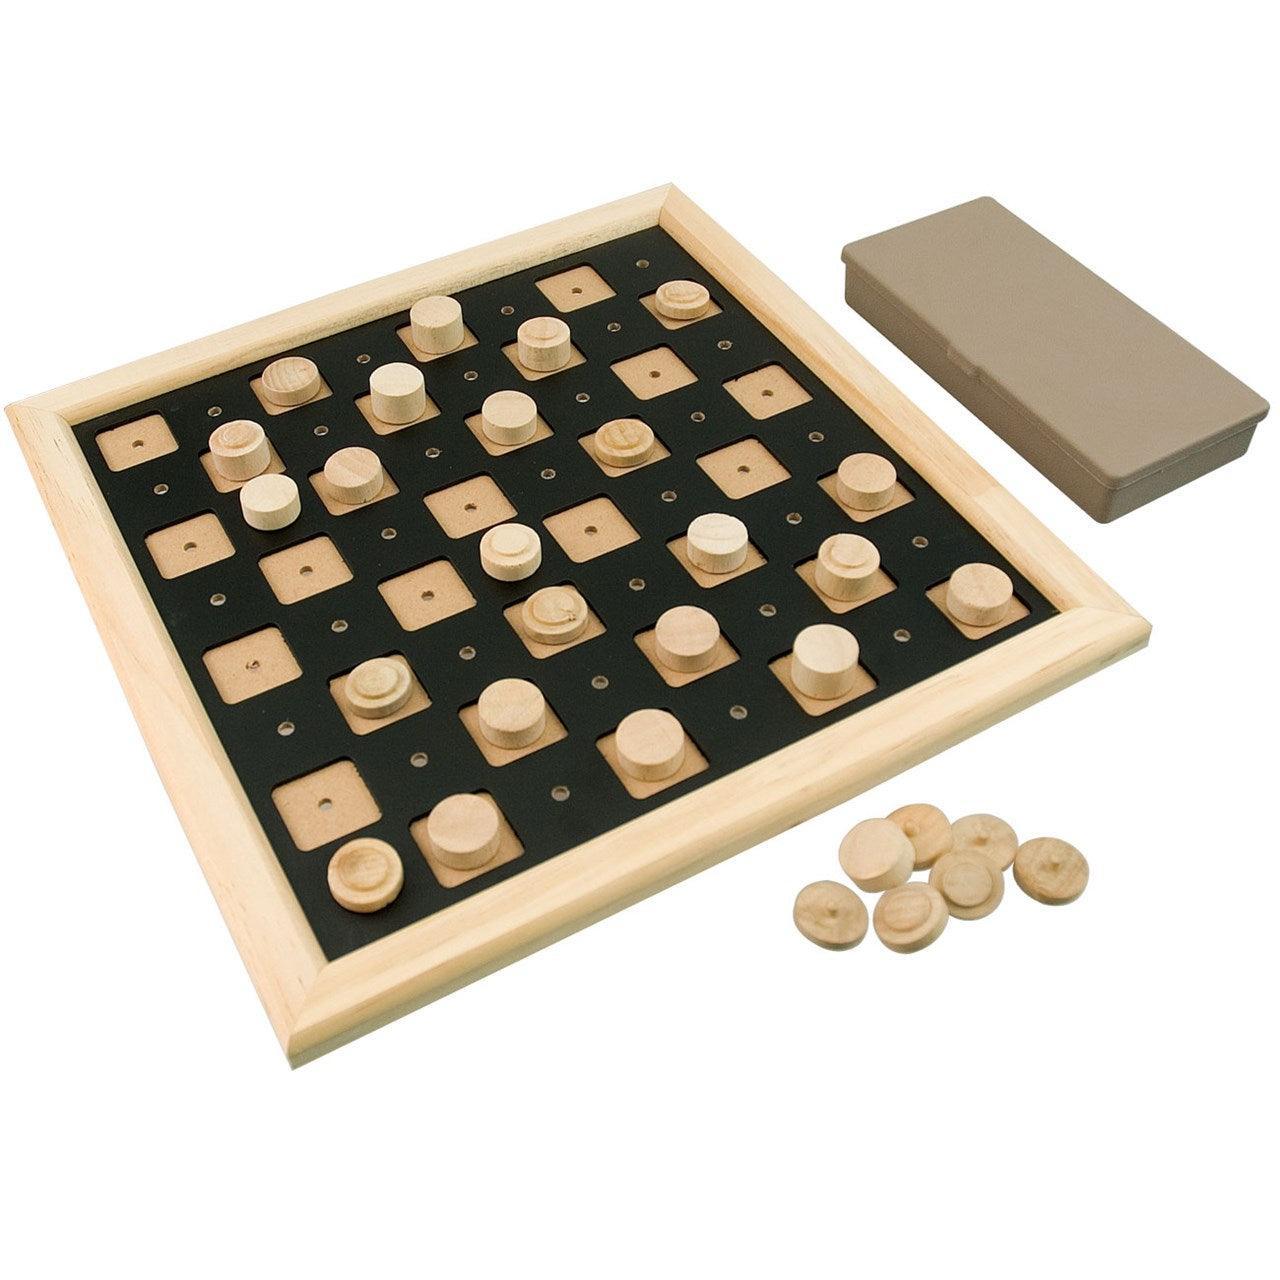 Tactile Checkers Set - The Low Vision Store